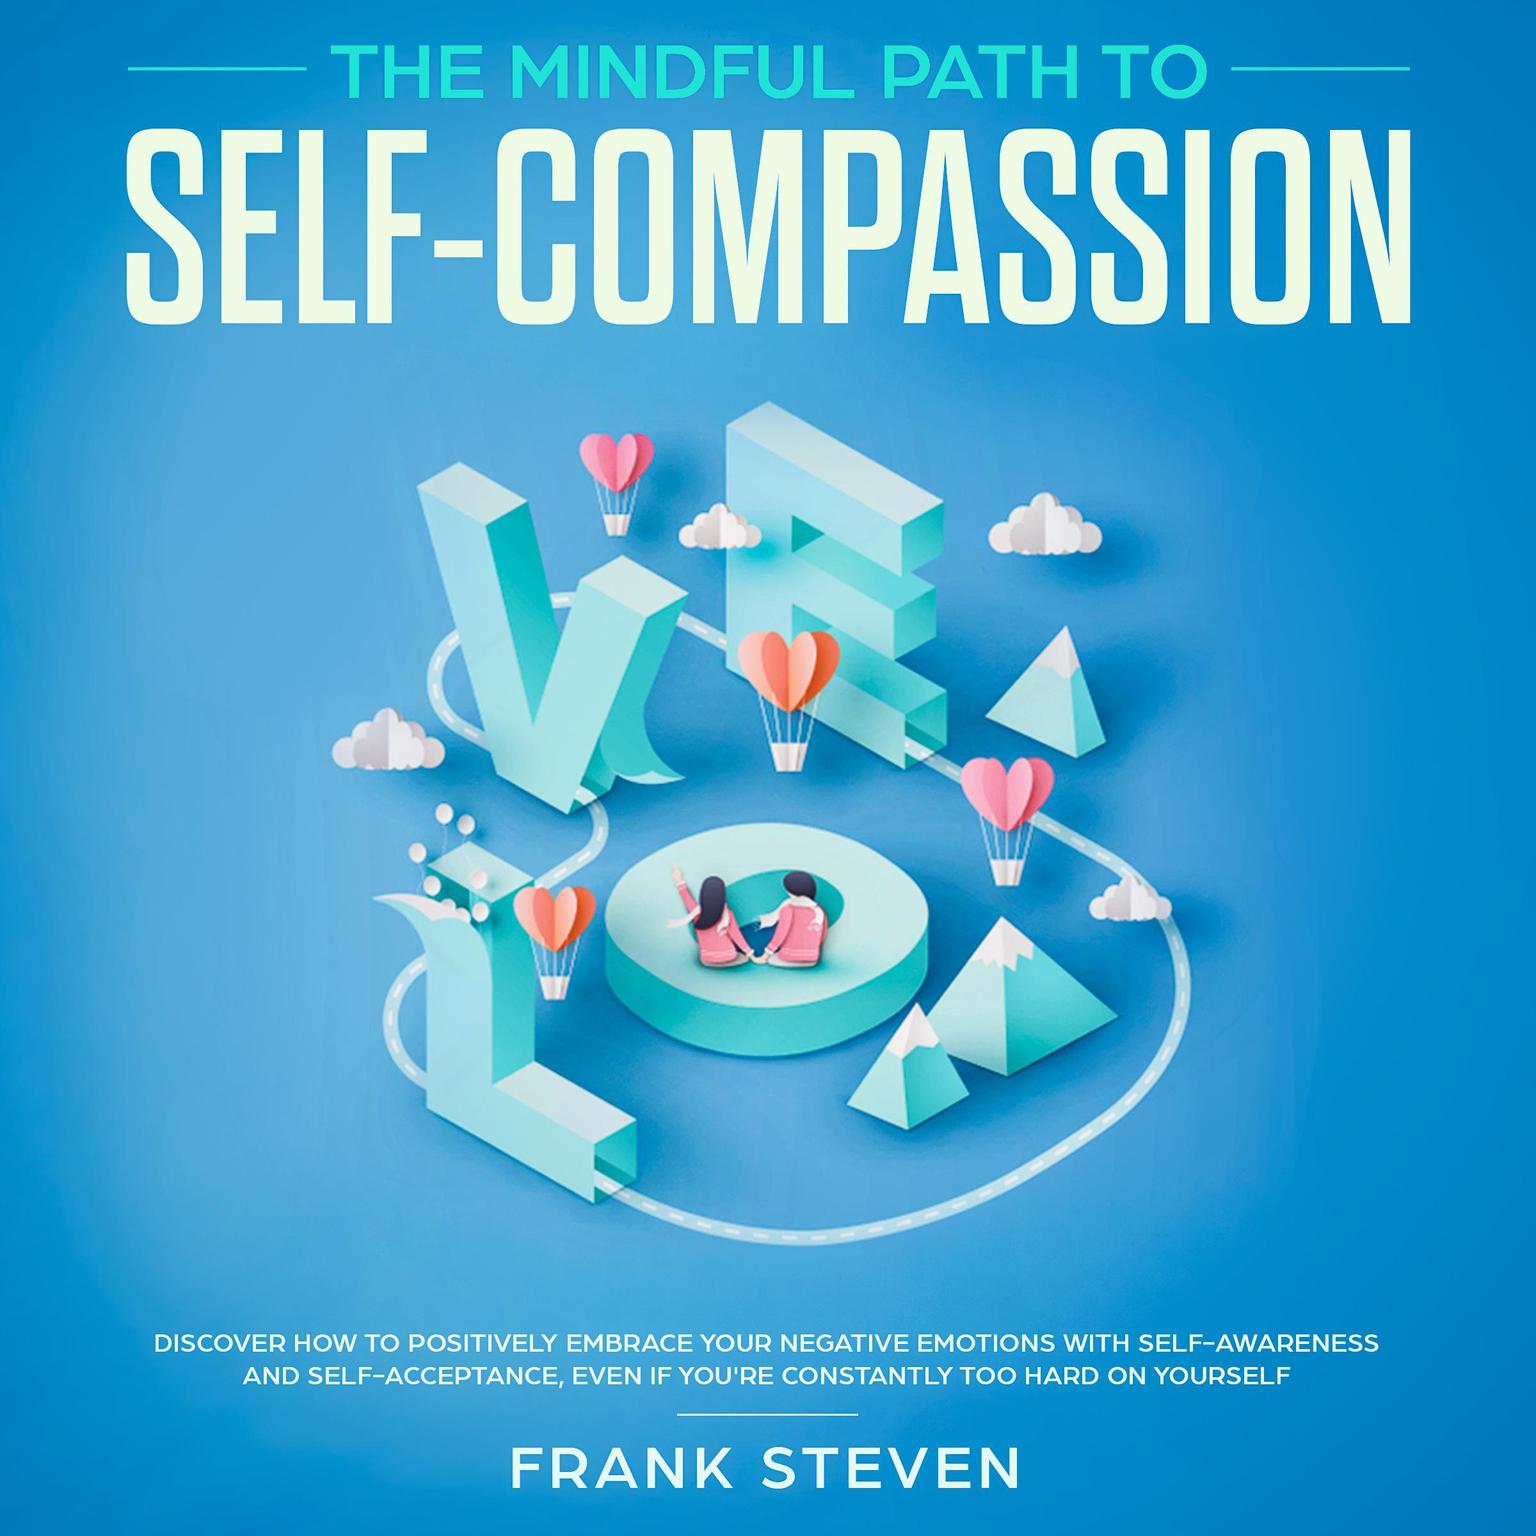 The Mindful Path to Self Compassion: Discover How to Positively Embrace Your Negative Emotions with Self-Awareness and Self-Acceptance, Even if You’re Constantly Too Hard on Yourself Audiobook, by Frank Steven